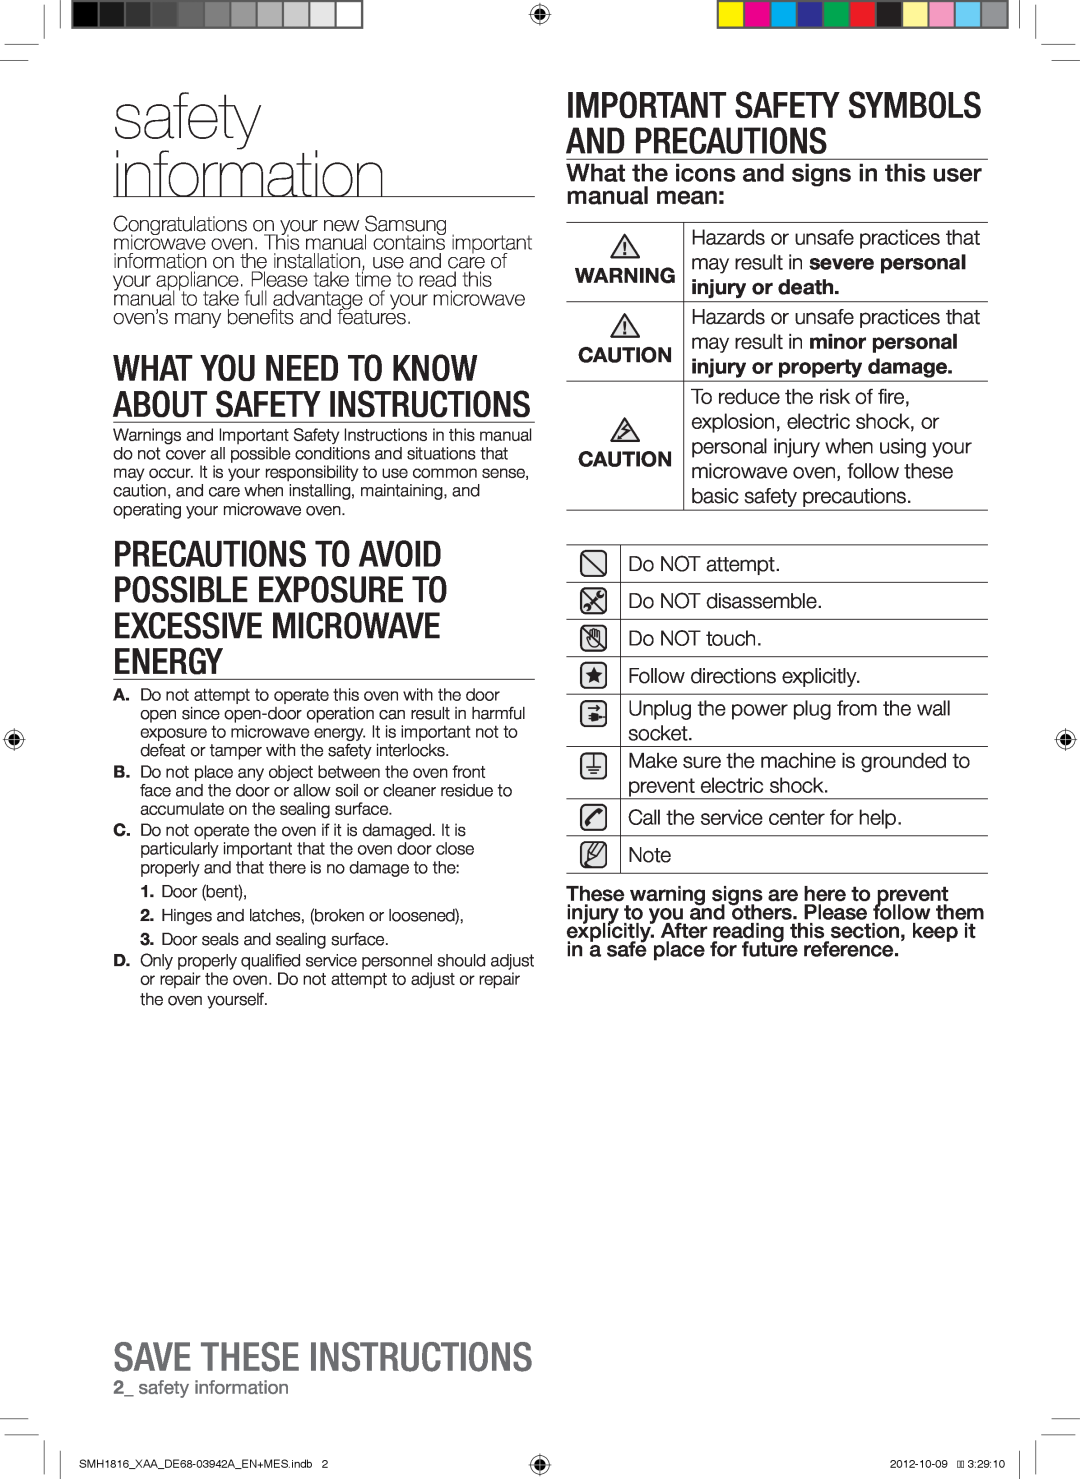 Samsung SMH1816W safety information, Precautions To Avoid Possible Exposure To Excessive Microwave Energy, injury or death 